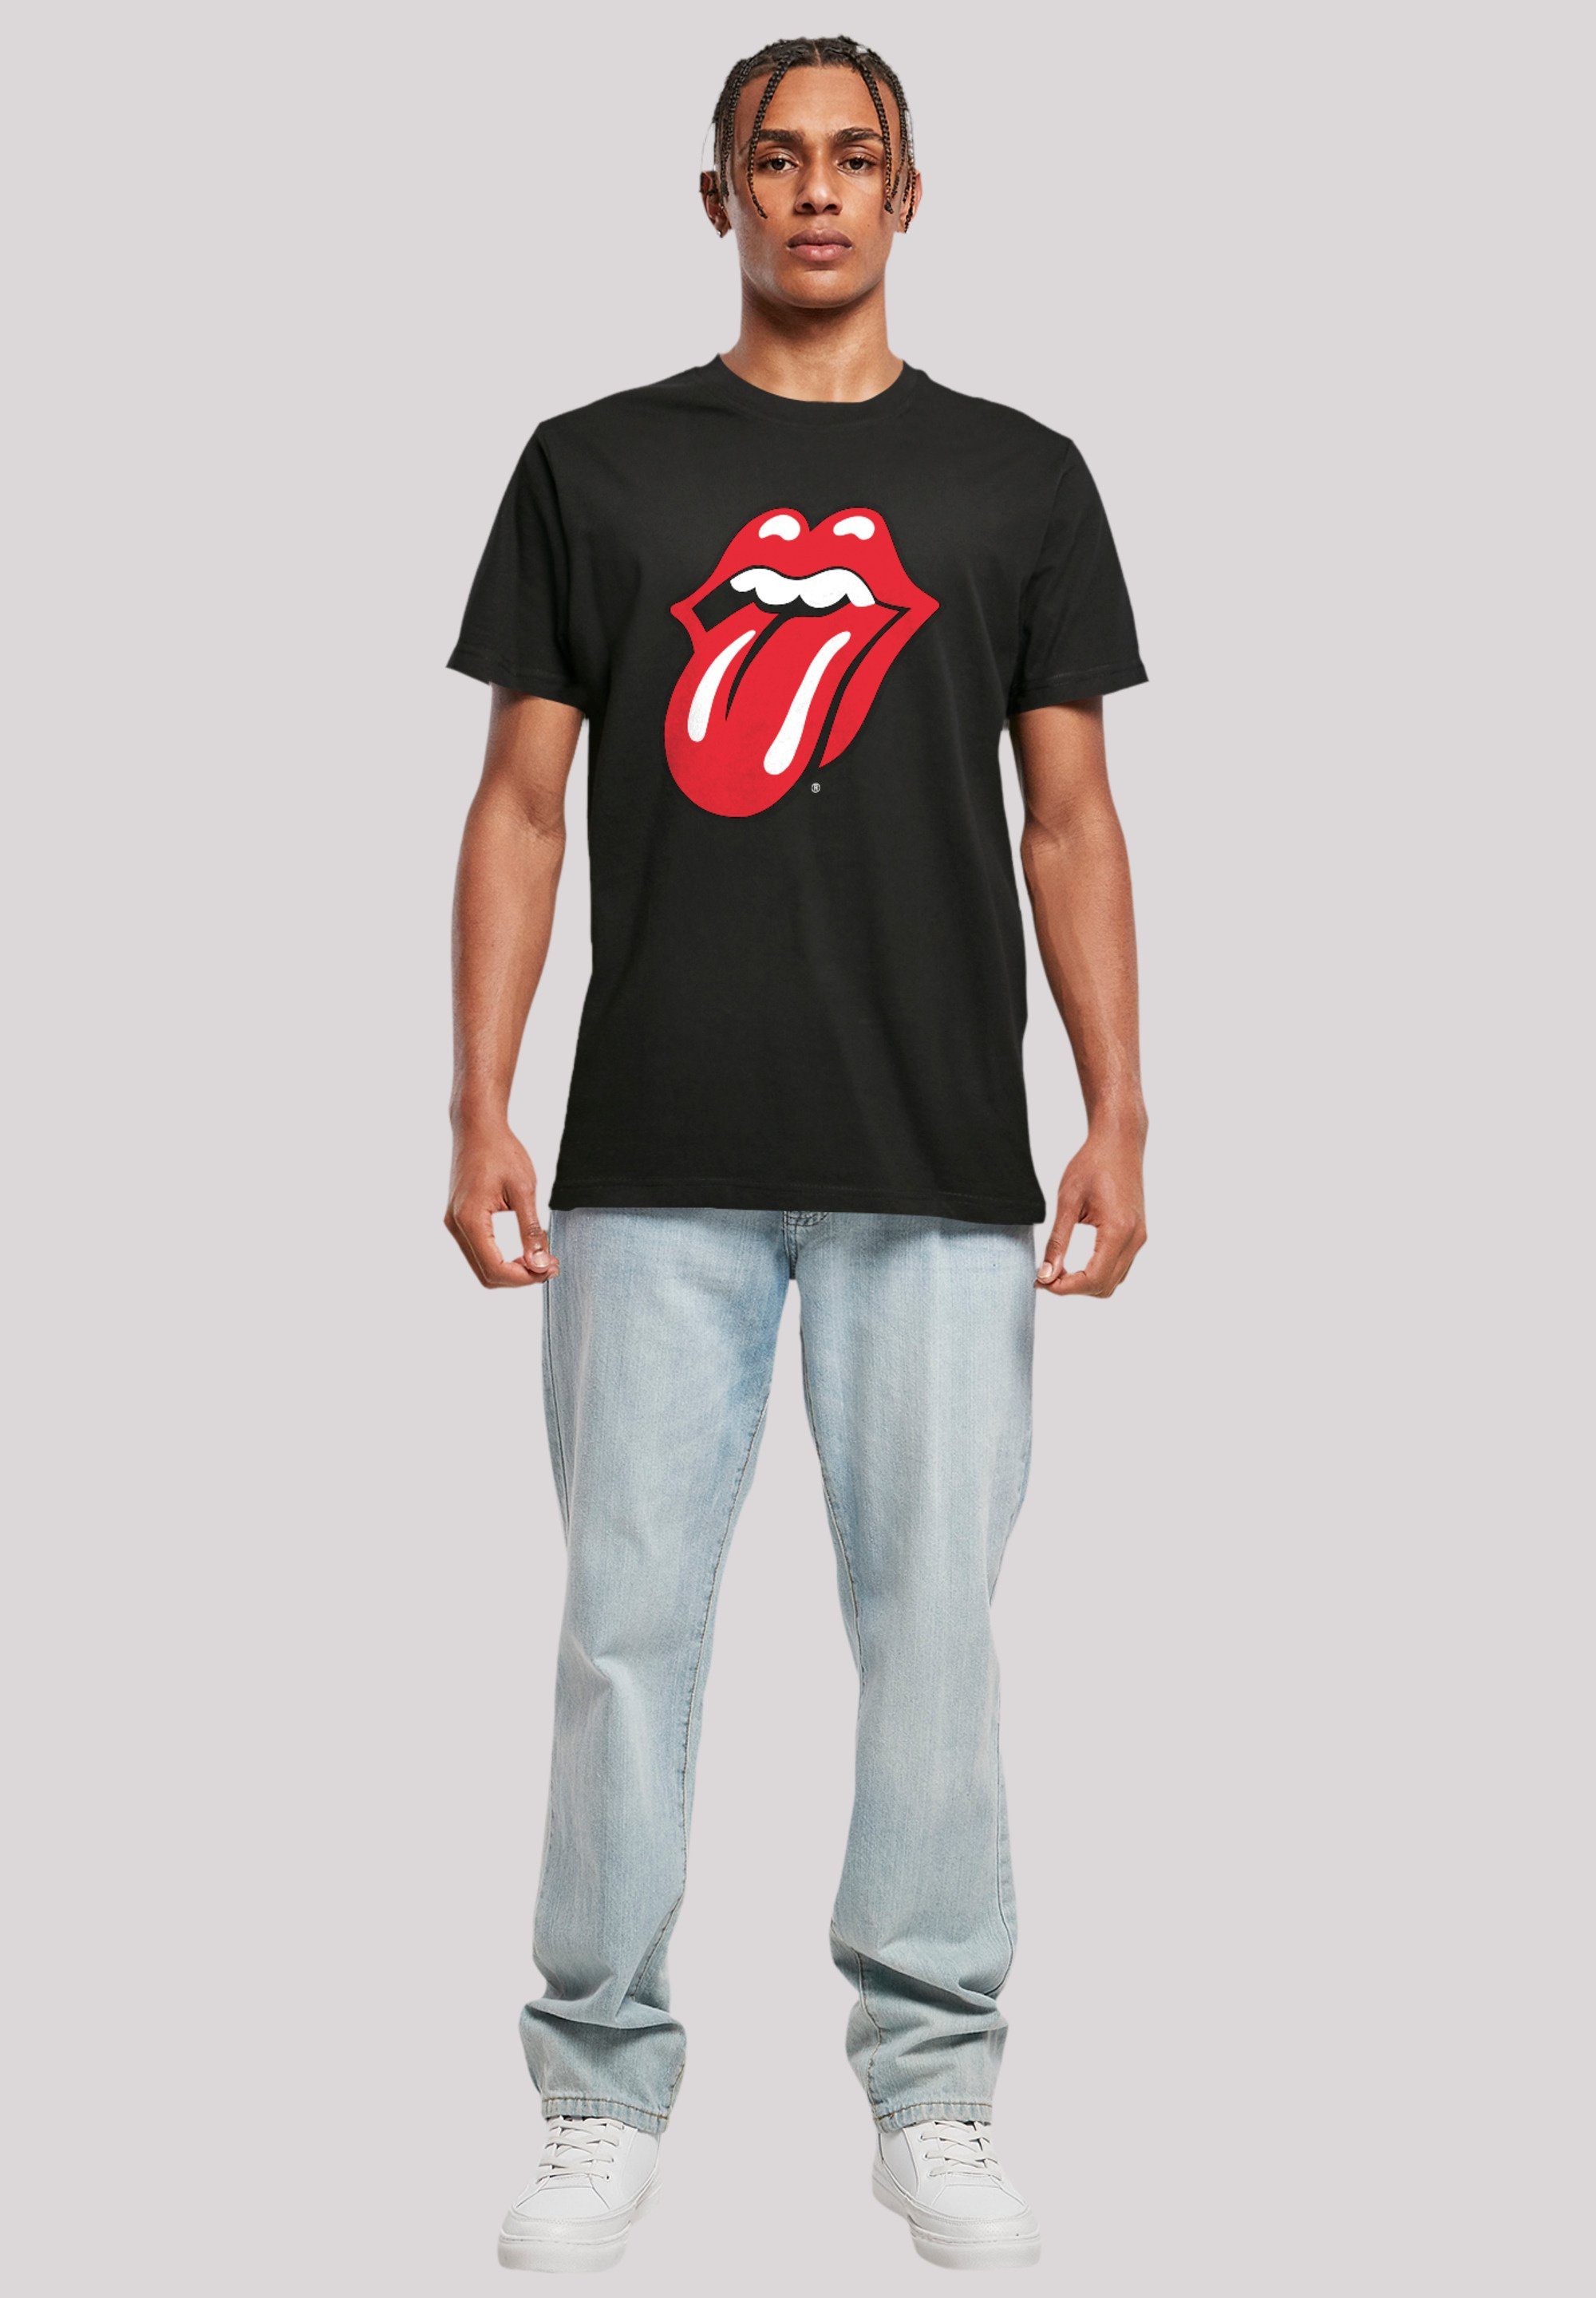 F4NT4STIC T-Shirt The Stones Print Zunge Rolling Rote schwarz